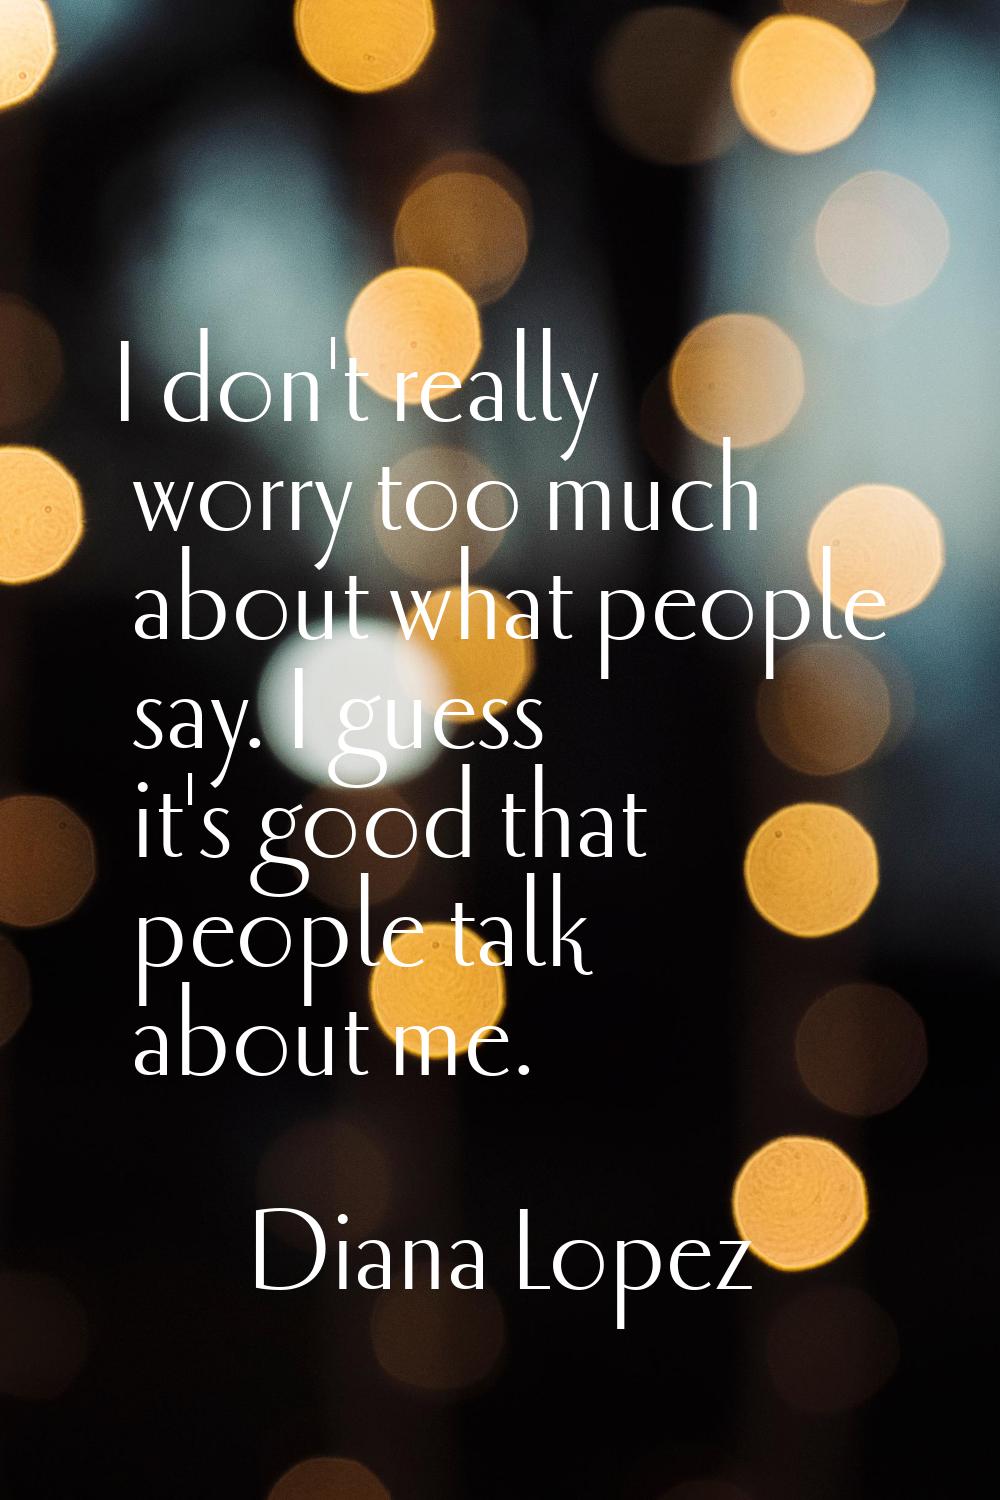 I don't really worry too much about what people say. I guess it's good that people talk about me.